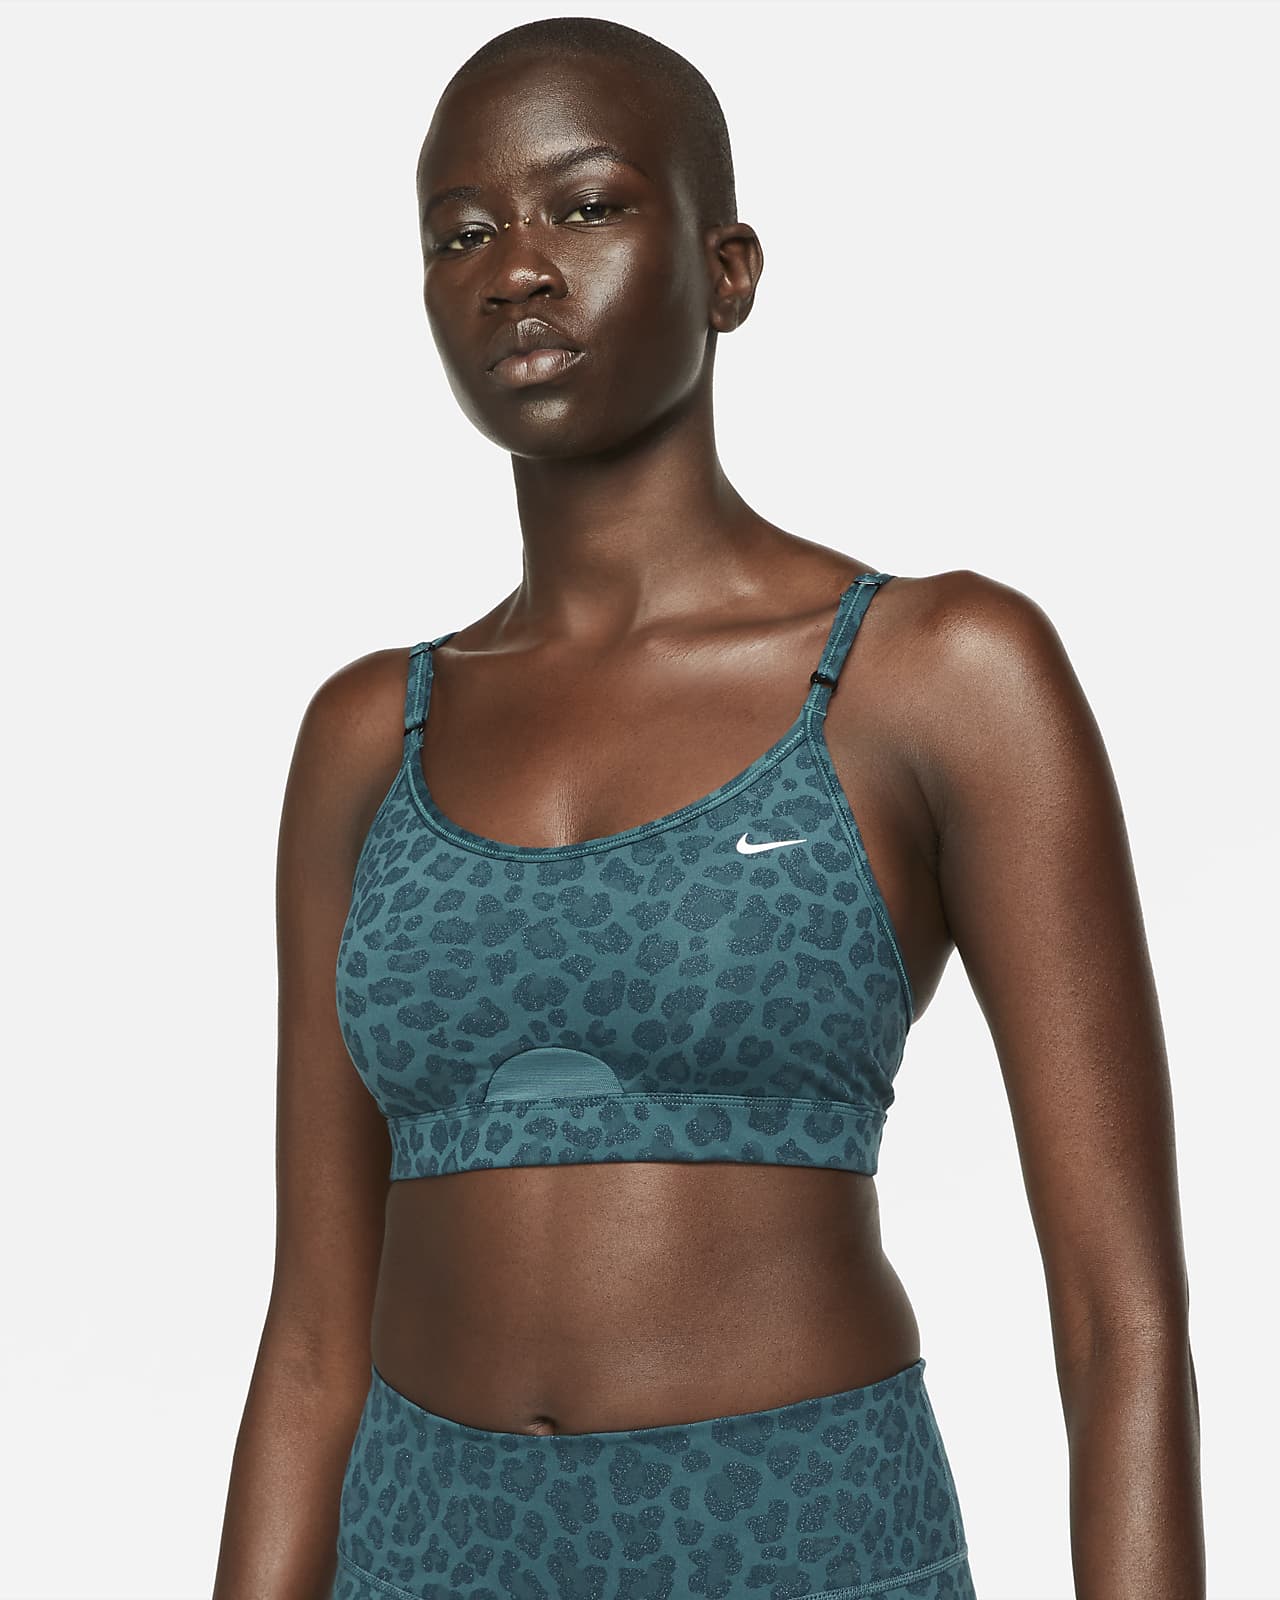 Nike Indy Air Gridiron Blue Light Support Women's Sports Bra Size M 